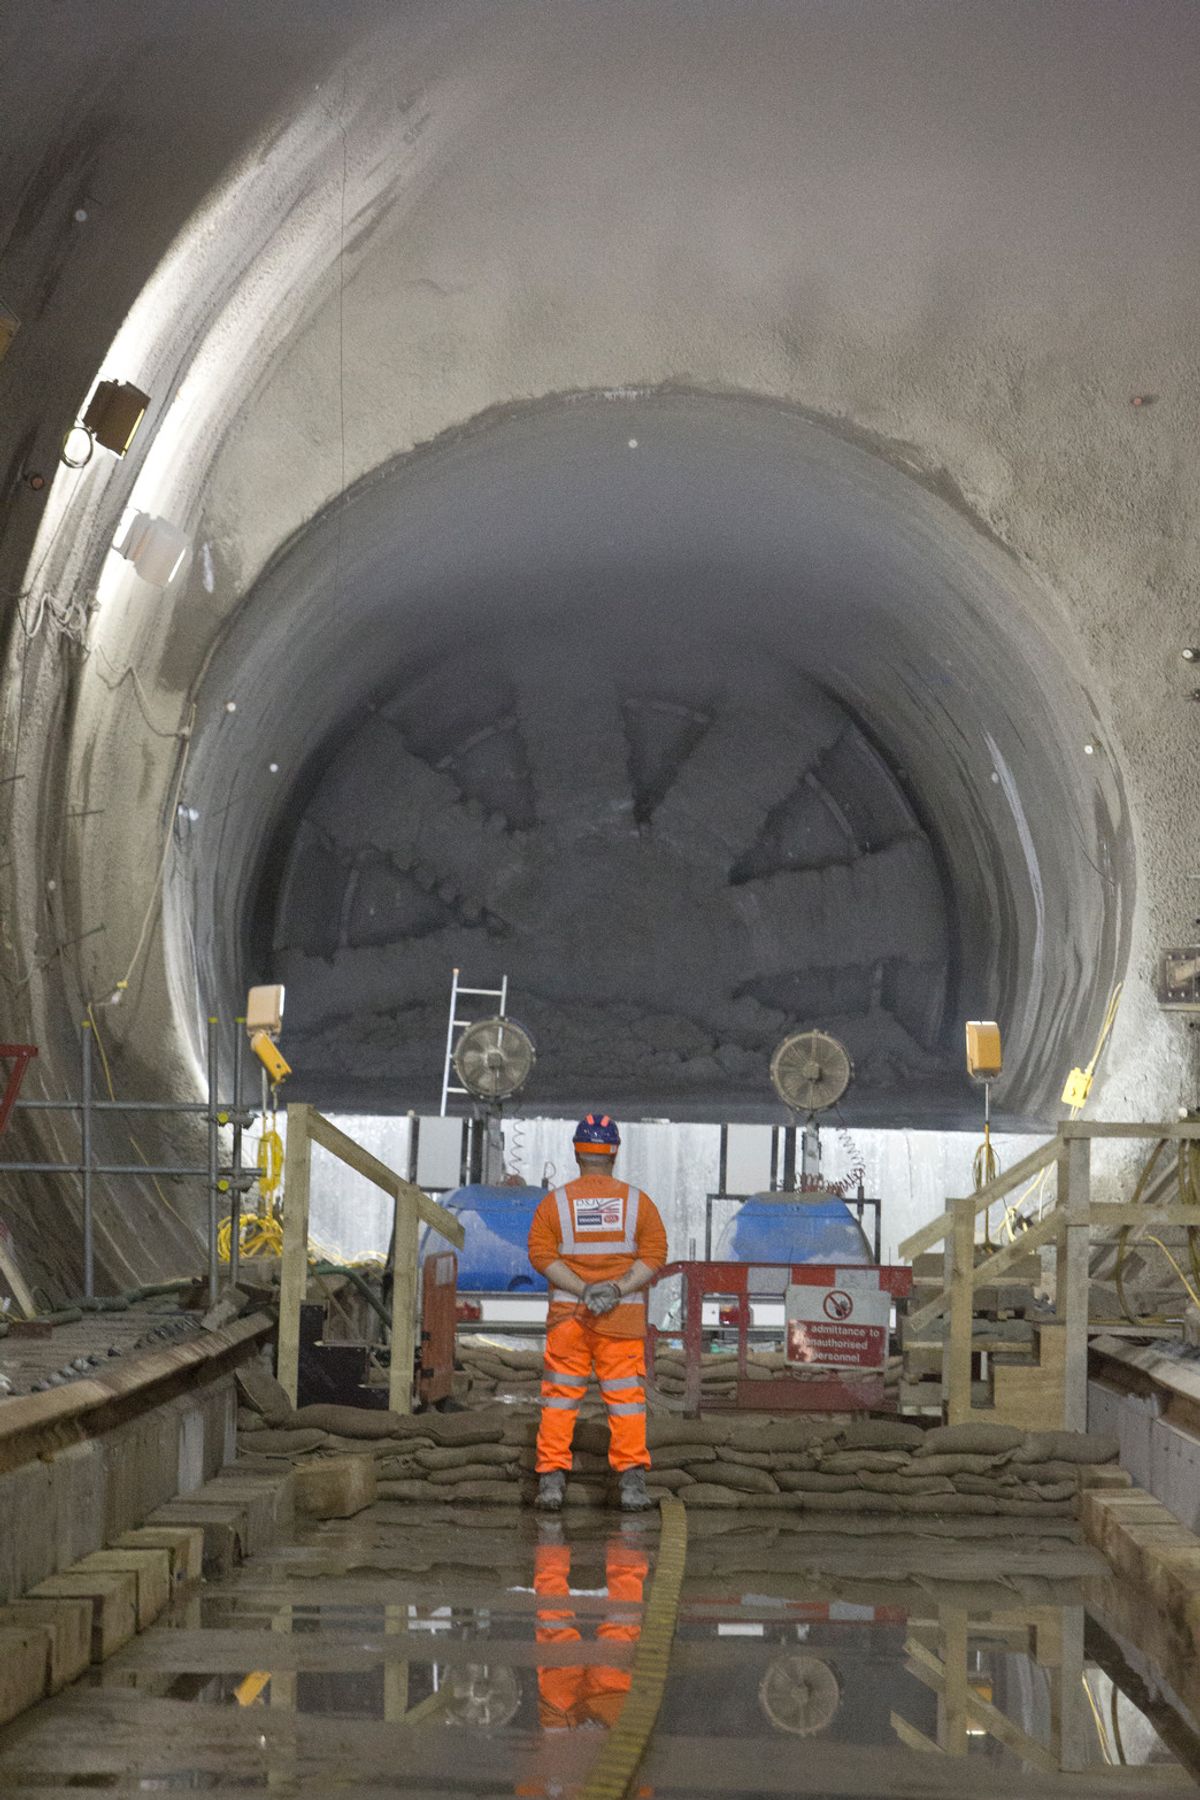 Docklands and south-east London Crossrail tunnels